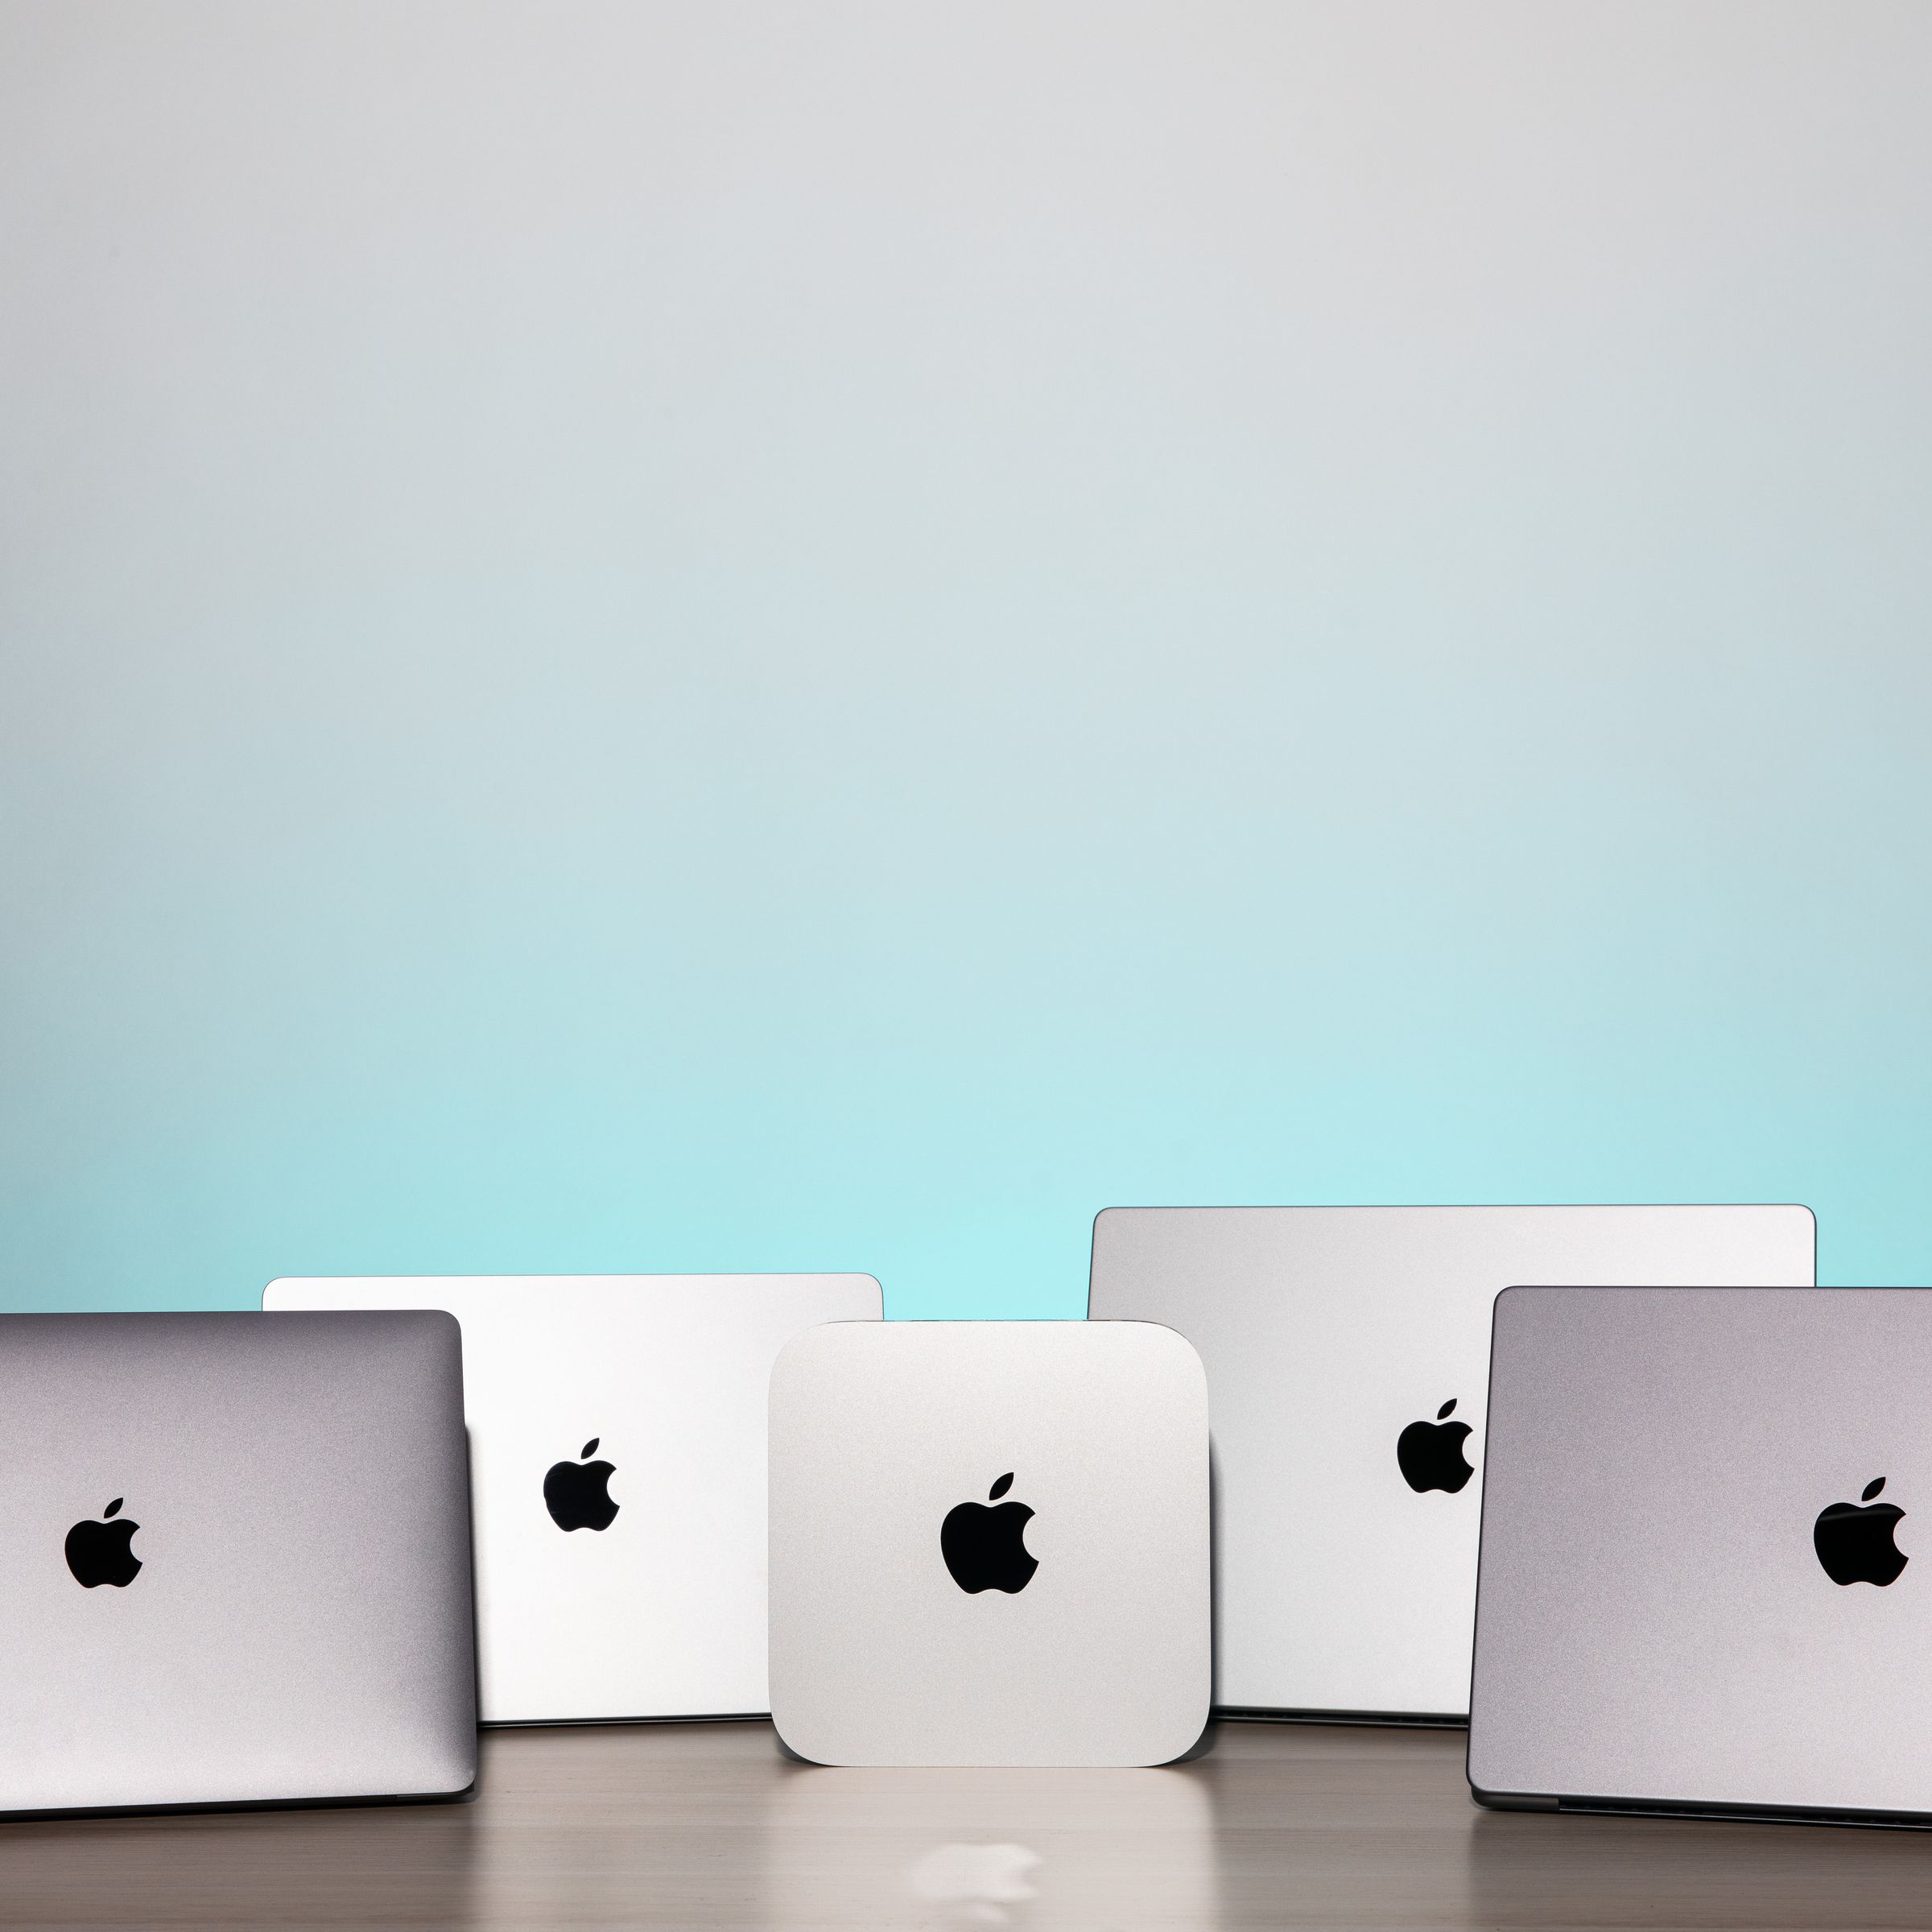 Various Apple products lined up